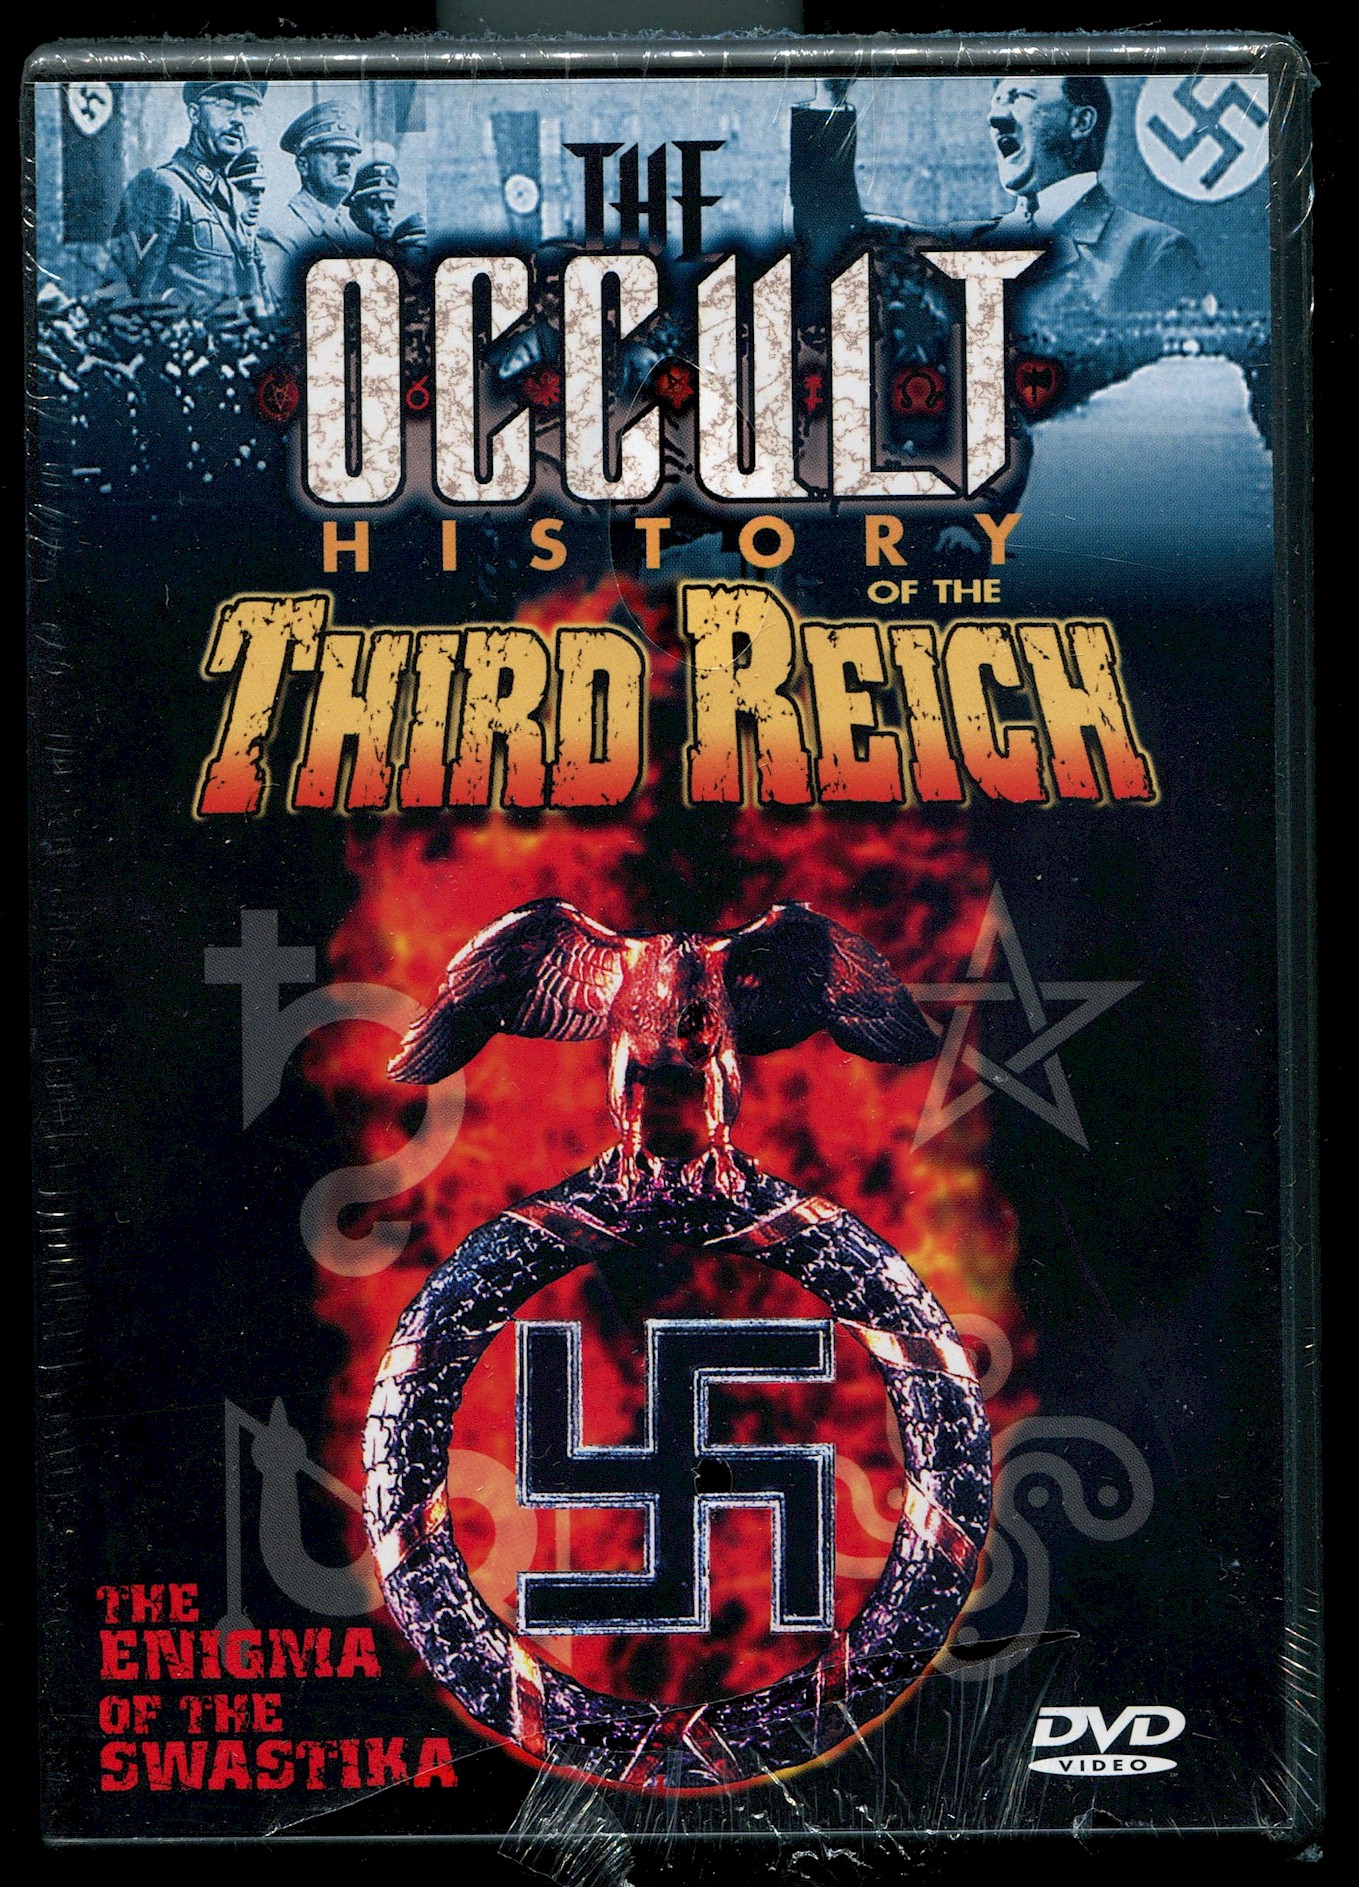 THE OCCULT HISTORY OF THE THIRD REICH - THE ENIGMA OF THE SWASTIKA DVD 